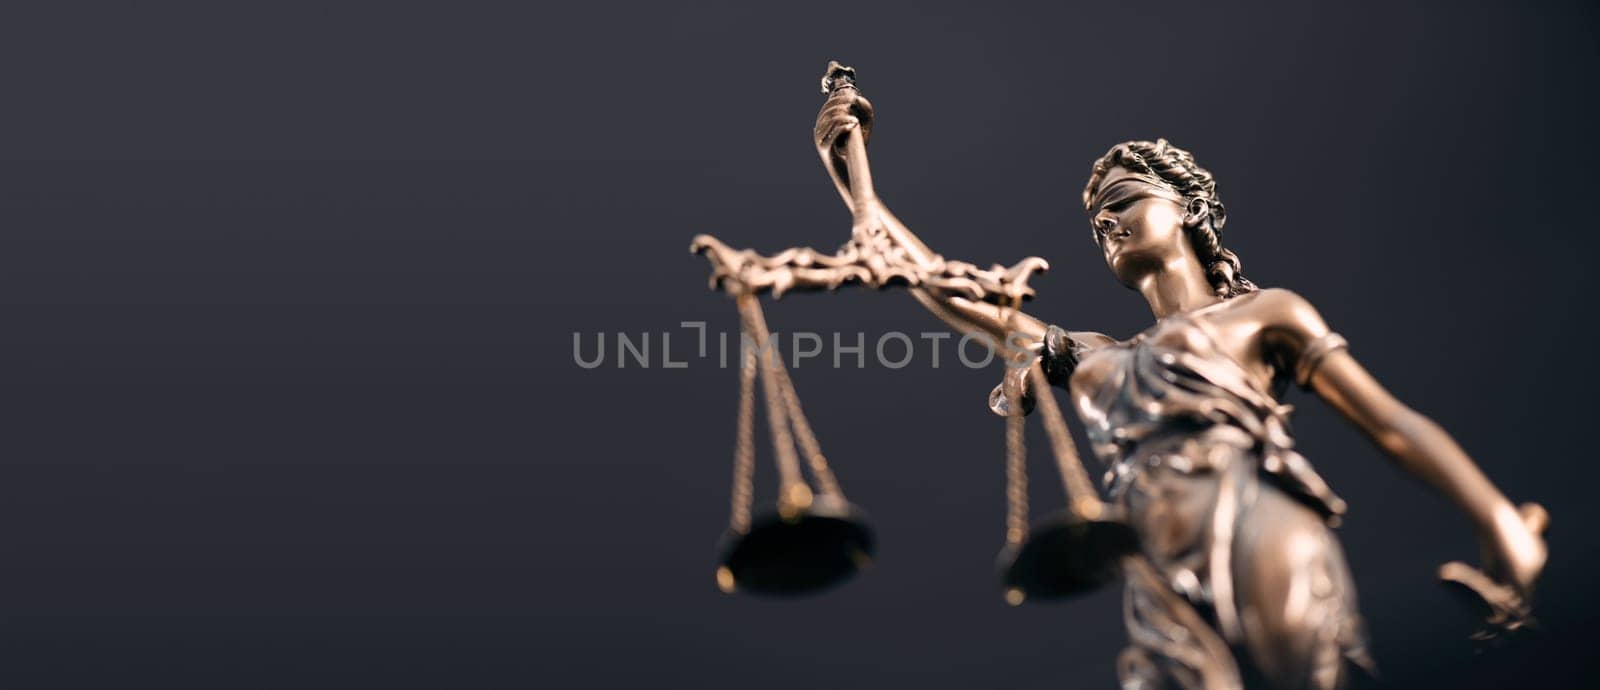 Law, legal, judge, lady justice concept by simpson33